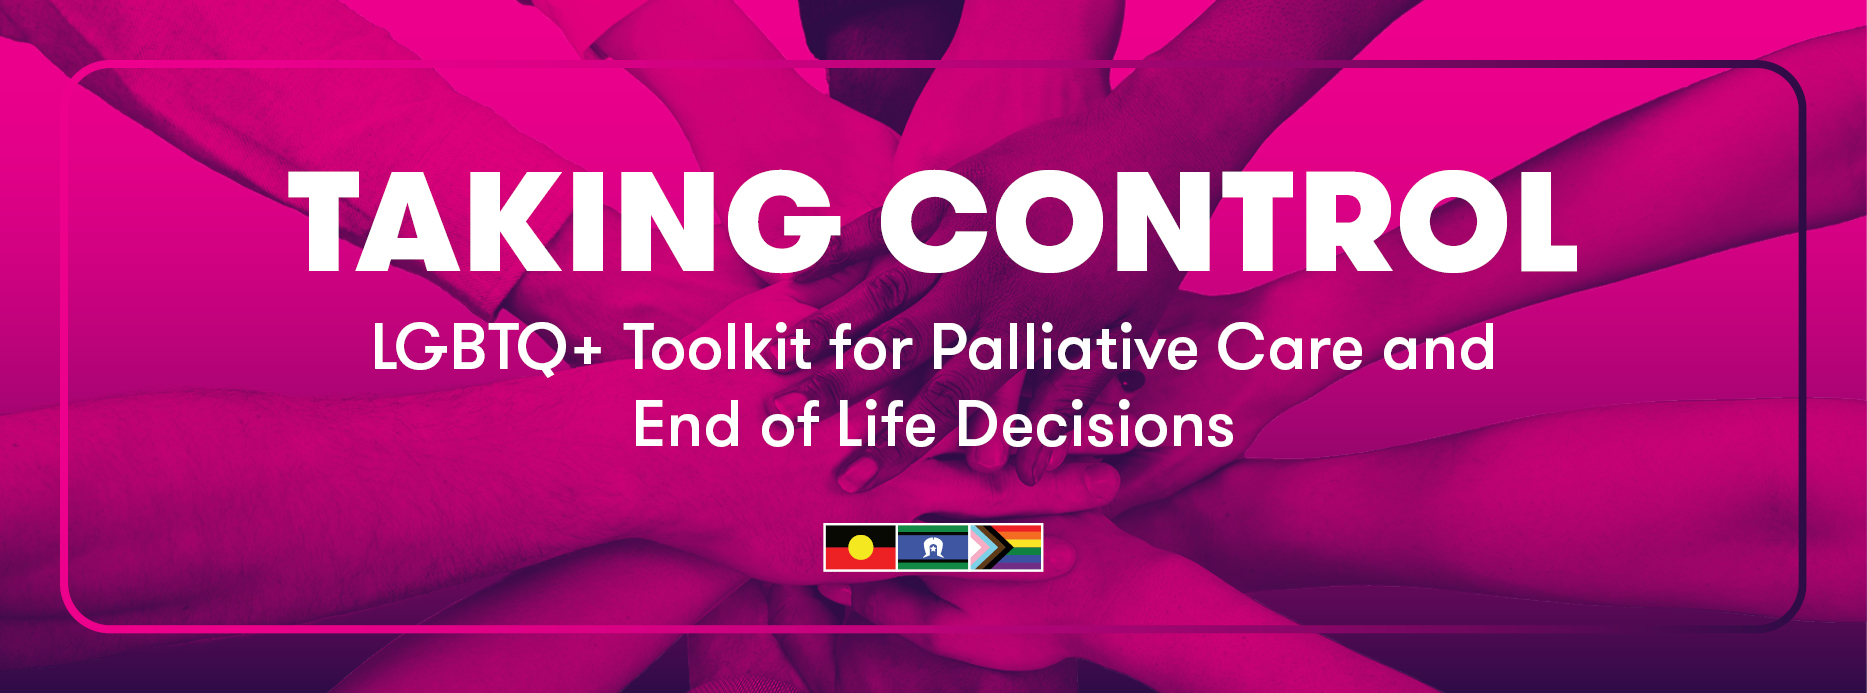 Taking Control  LGBTQ+ Toolkit for Palliative Care and End of Life Decisions 